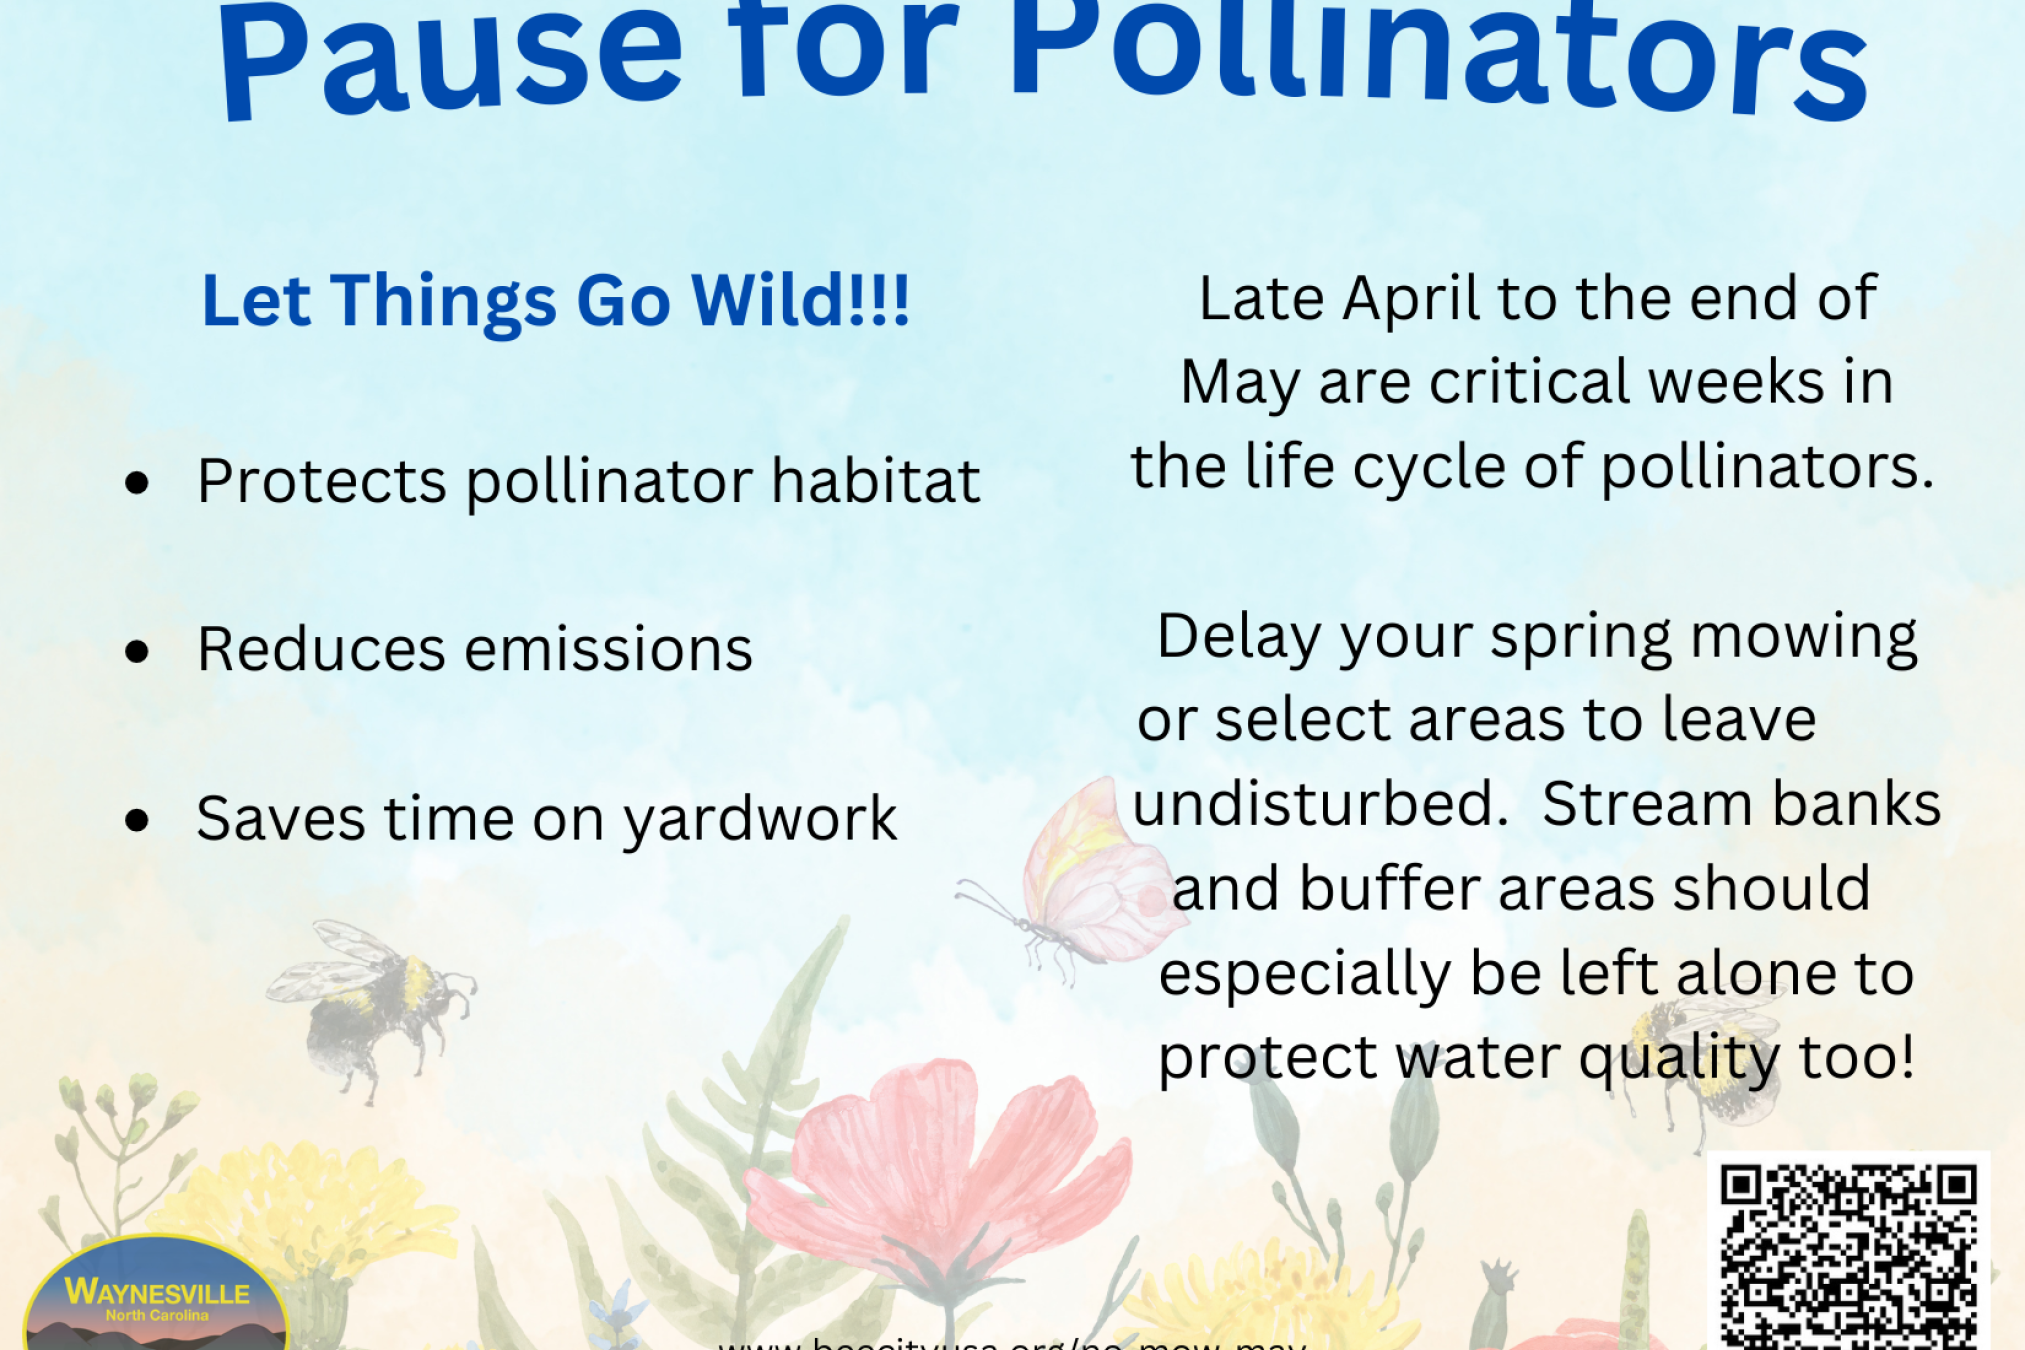 Pause for Pollinators